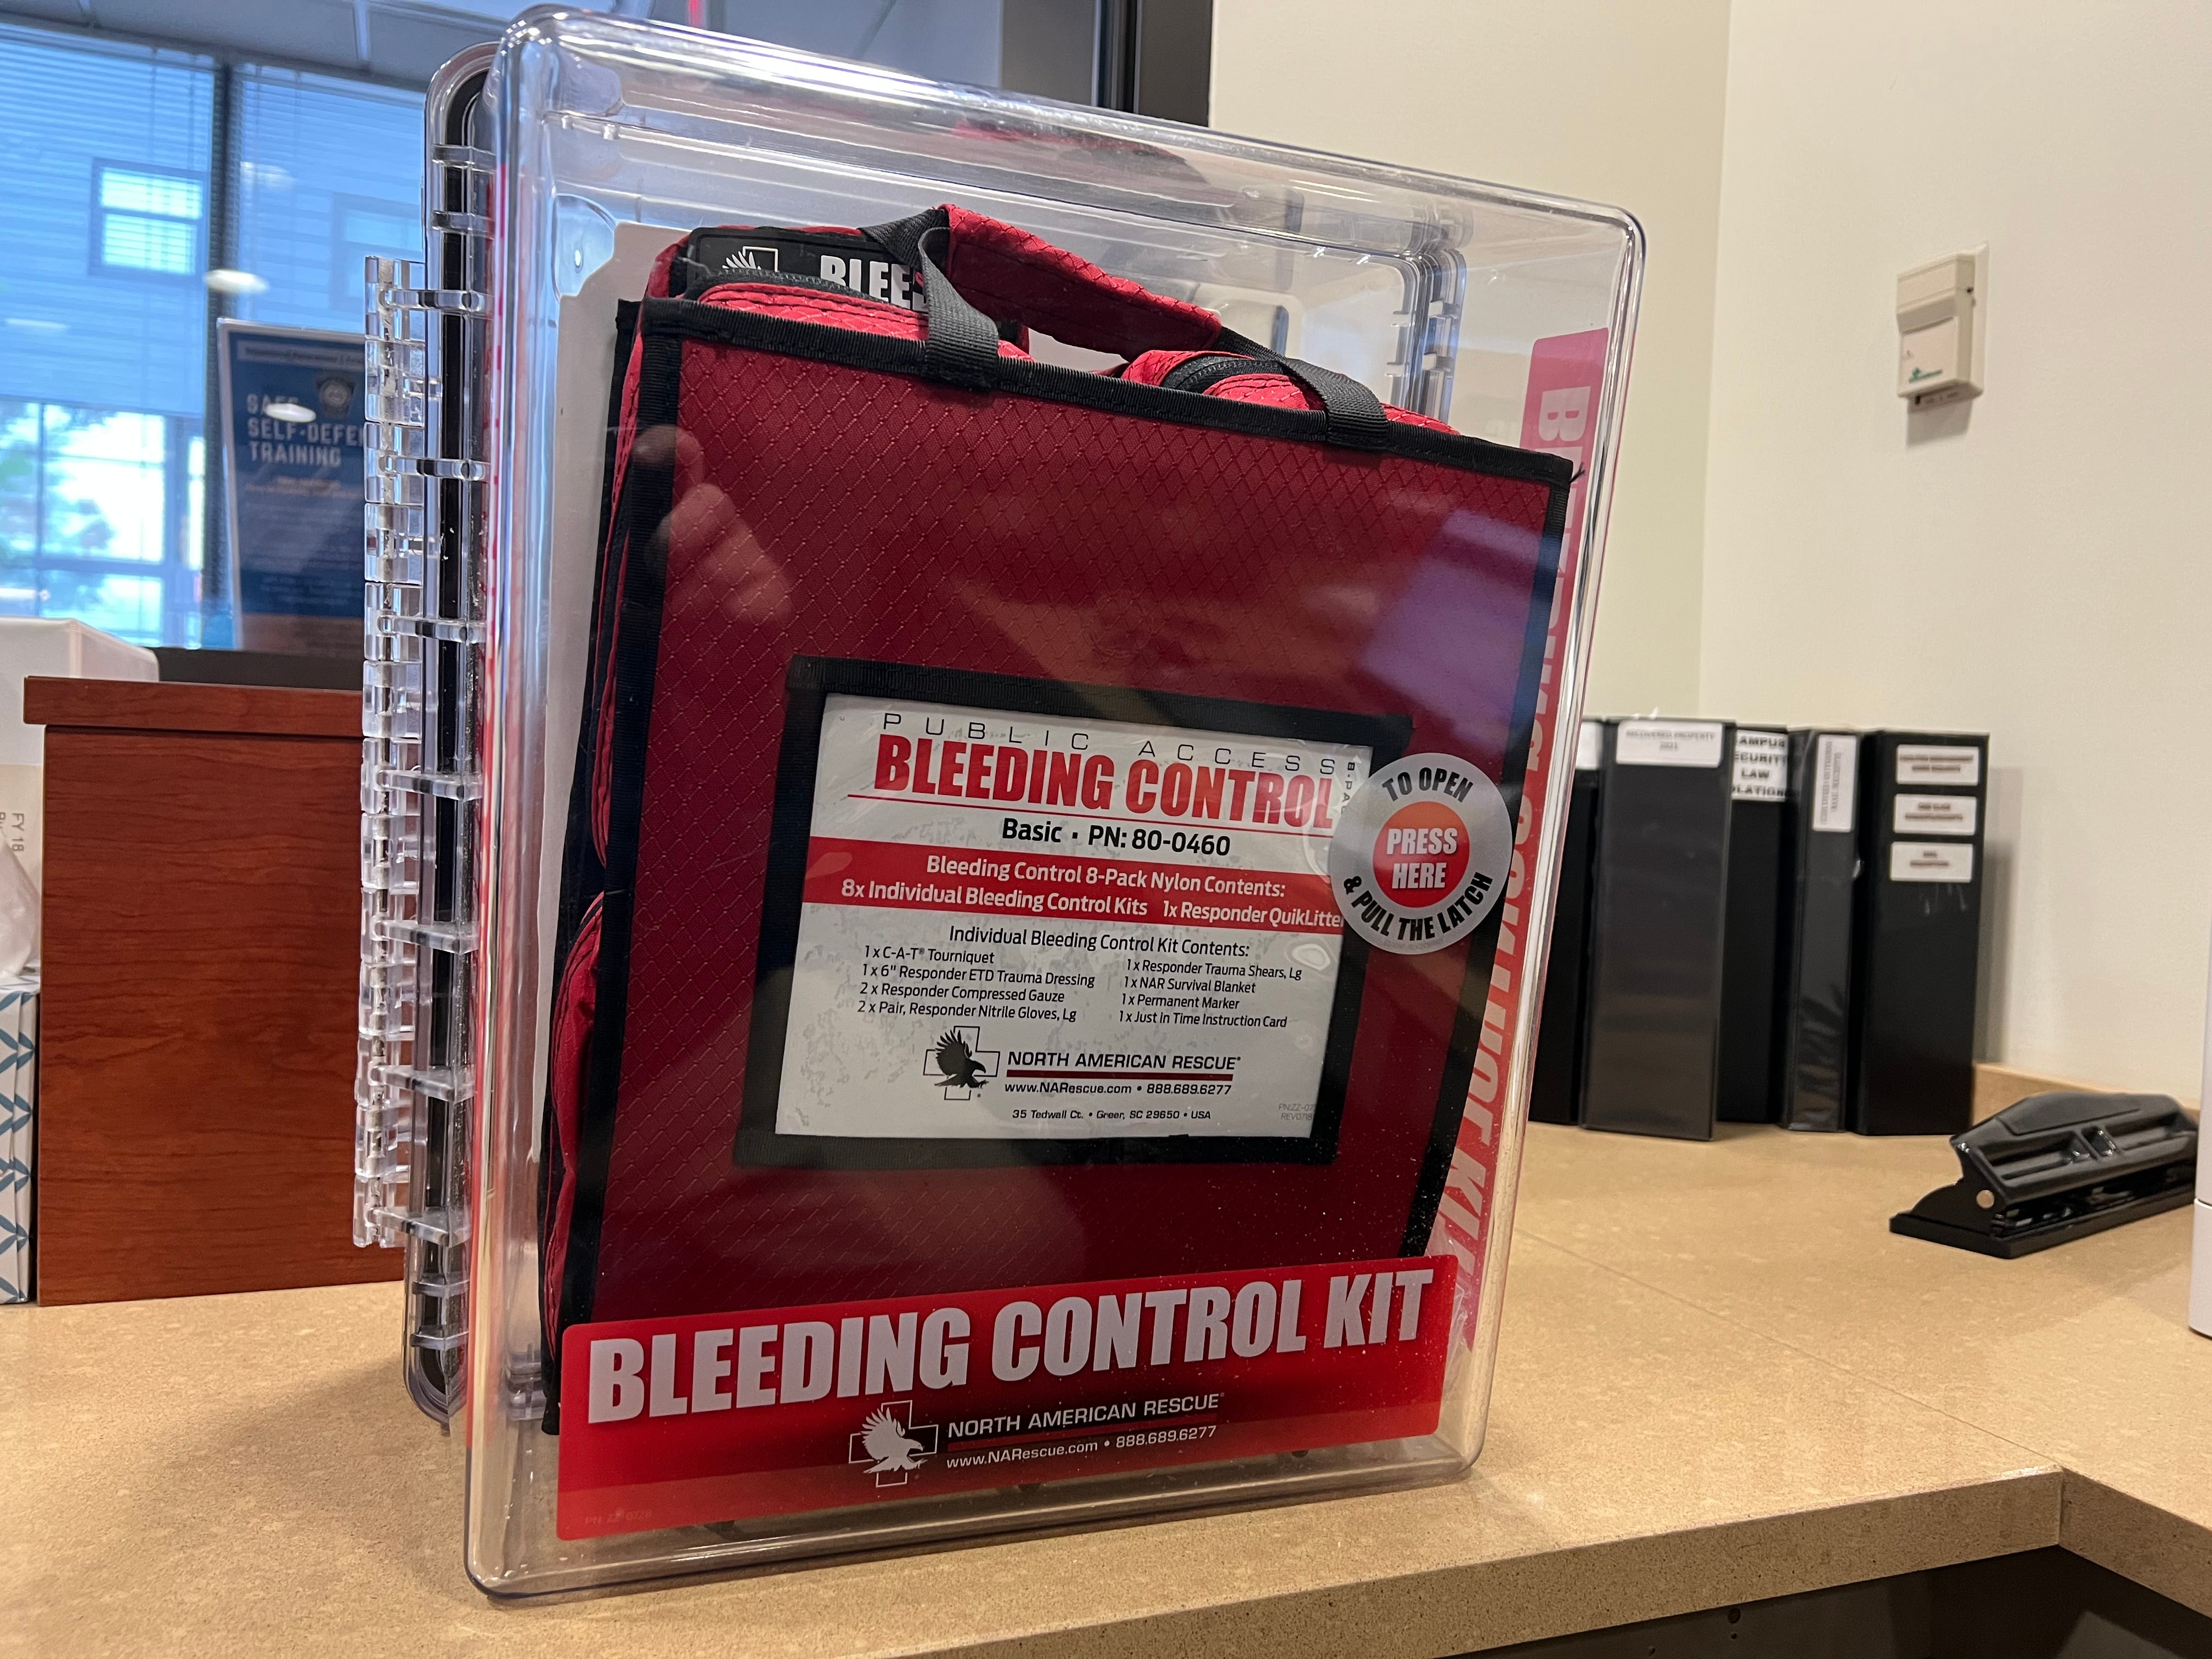 A Stop the Bleed kit located at the Public Safety Building in Oakland.